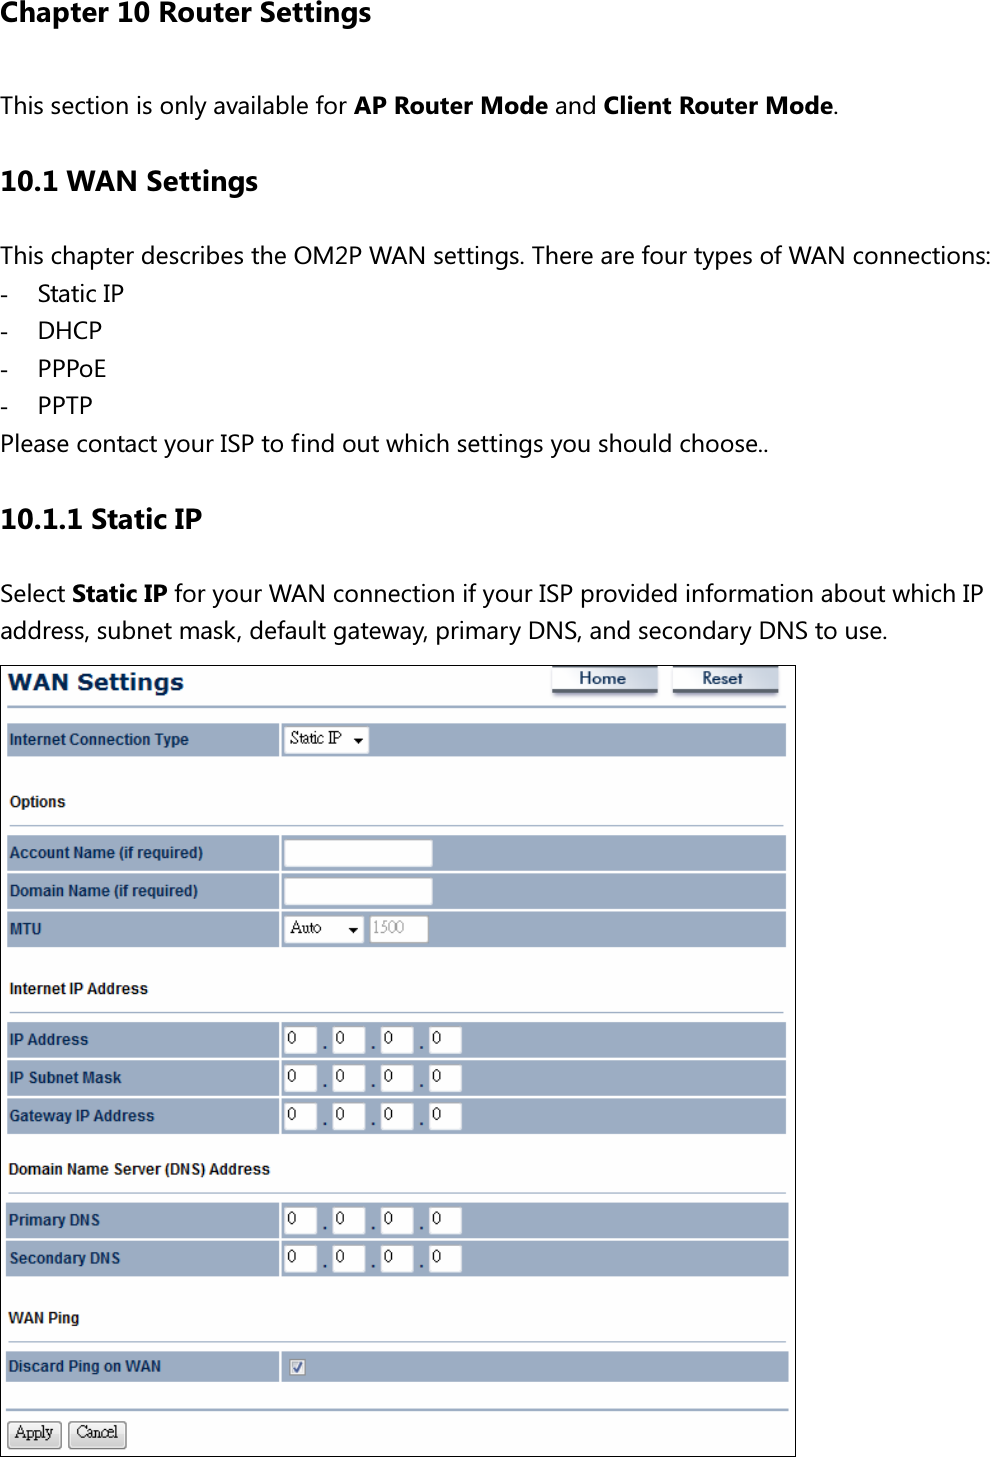  Chapter 10 Router Settings This section is only available for AP Router Mode and Client Router Mode. 10.1 WAN Settings This chapter describes the OM2P WAN settings. There are four types of WAN connections: - Static IP - DHCP - PPPoE - PPTP Please contact your ISP to find out which settings you should choose.. 10.1.1 Static IP Select Static IP for your WAN connection if your ISP provided information about which IP address, subnet mask, default gateway, primary DNS, and secondary DNS to use.  